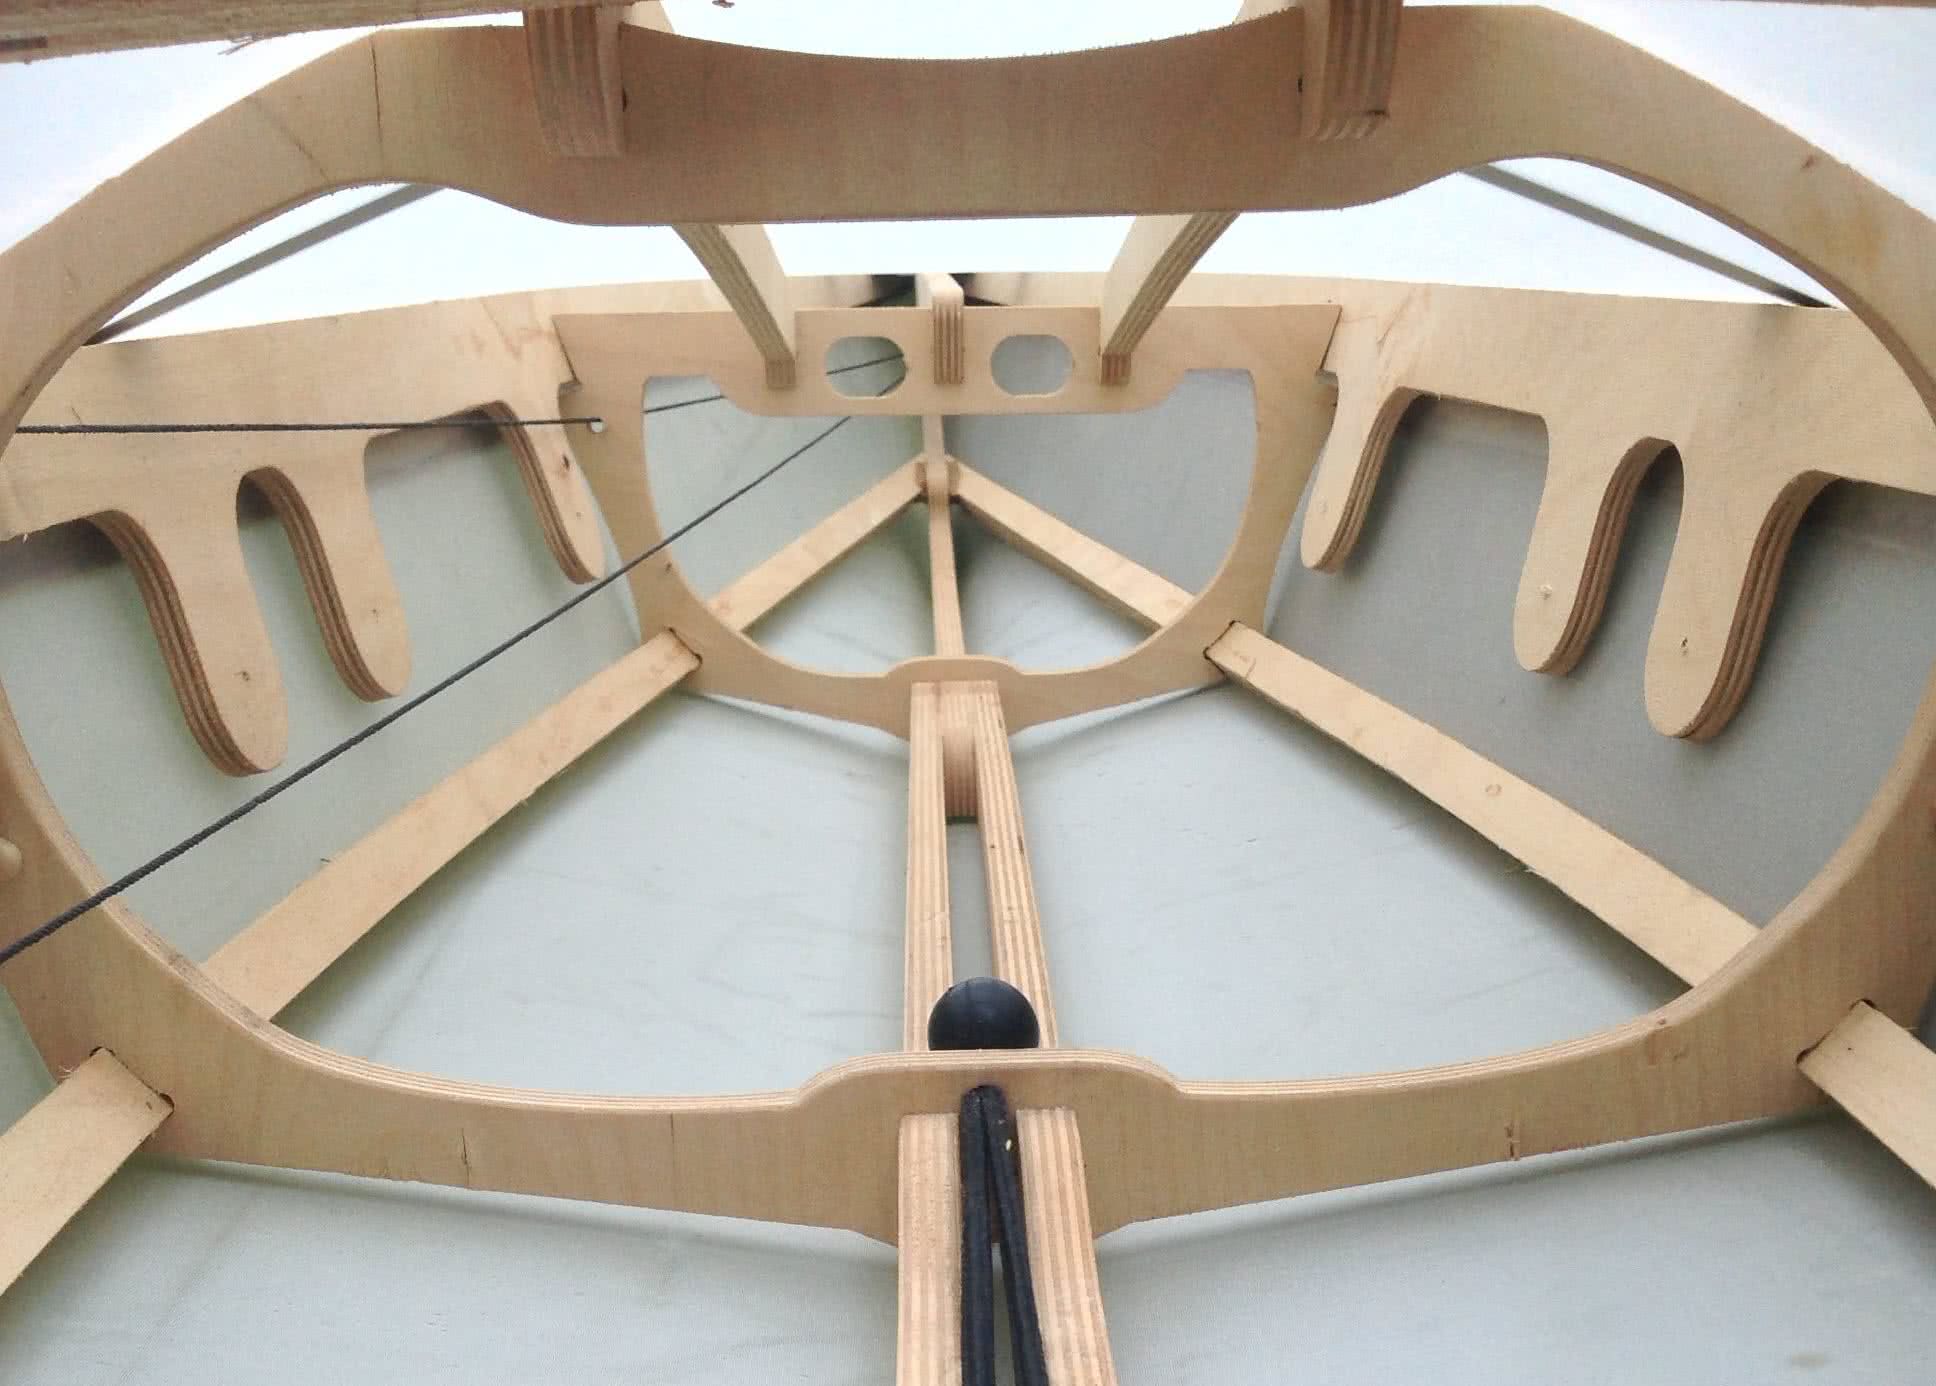 yes! skin-on-frame kayaks use natural products waveschamp